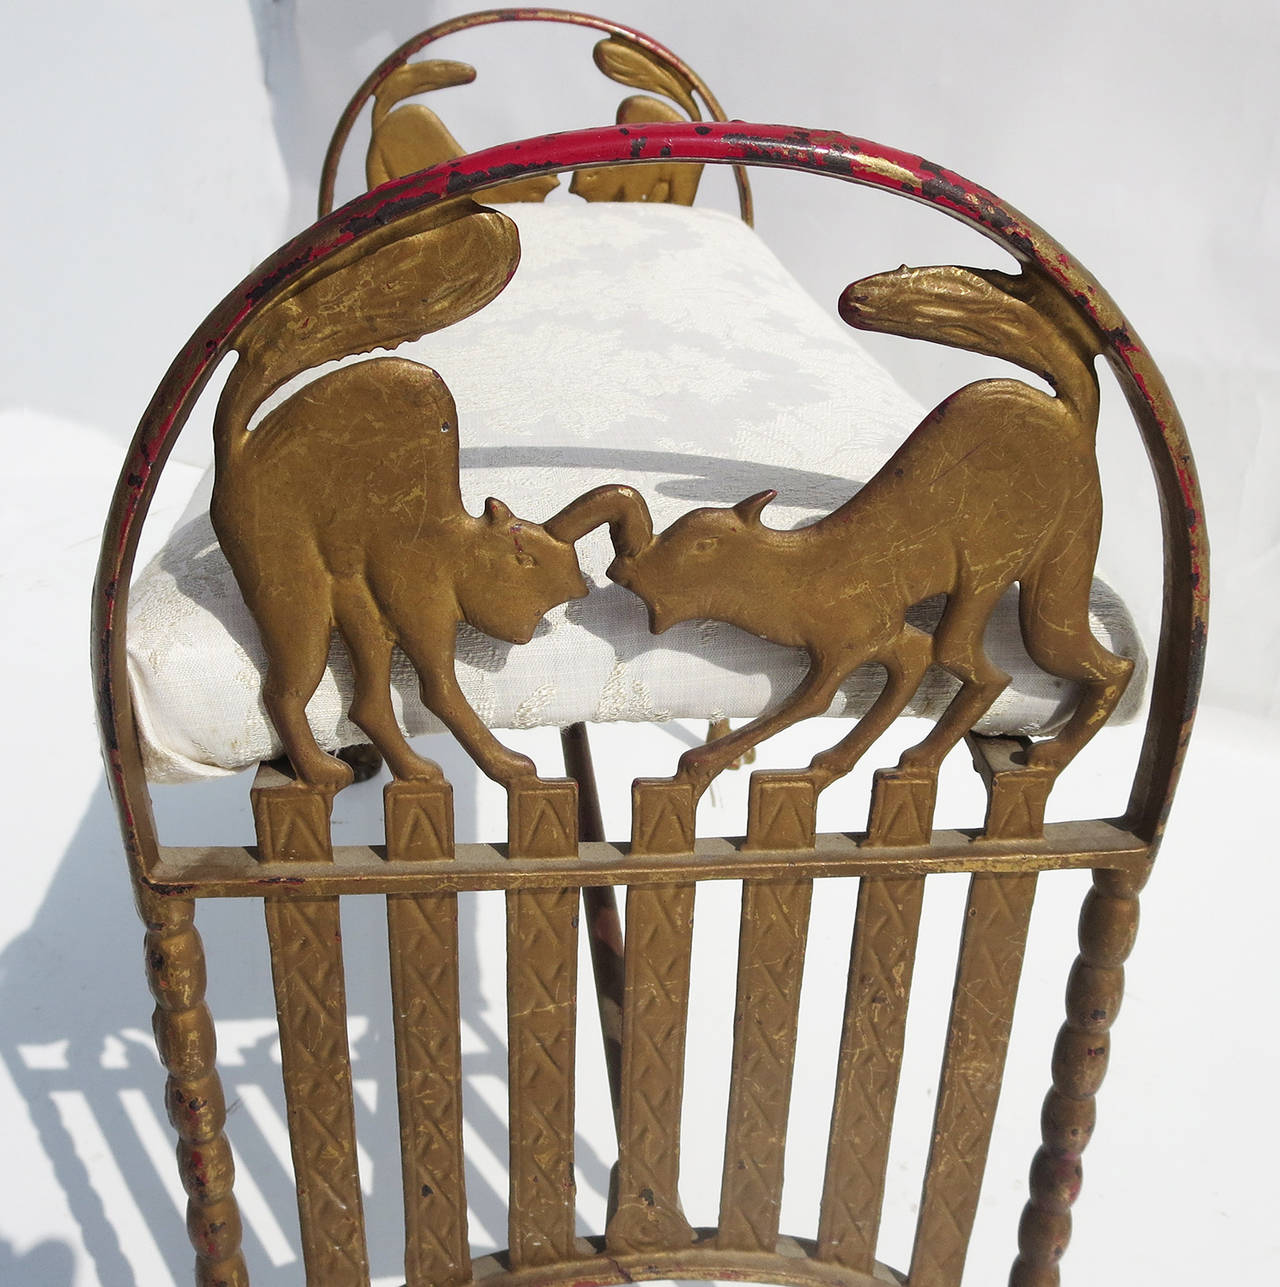 This ultra-charming iron bench is decorated in an alley cat motif. Featuring two cats at each end, they are perched on a fence and starting to scrap. One cat has a paw up, aimed at the opposing cats head. Even the four feet of the bench are feline